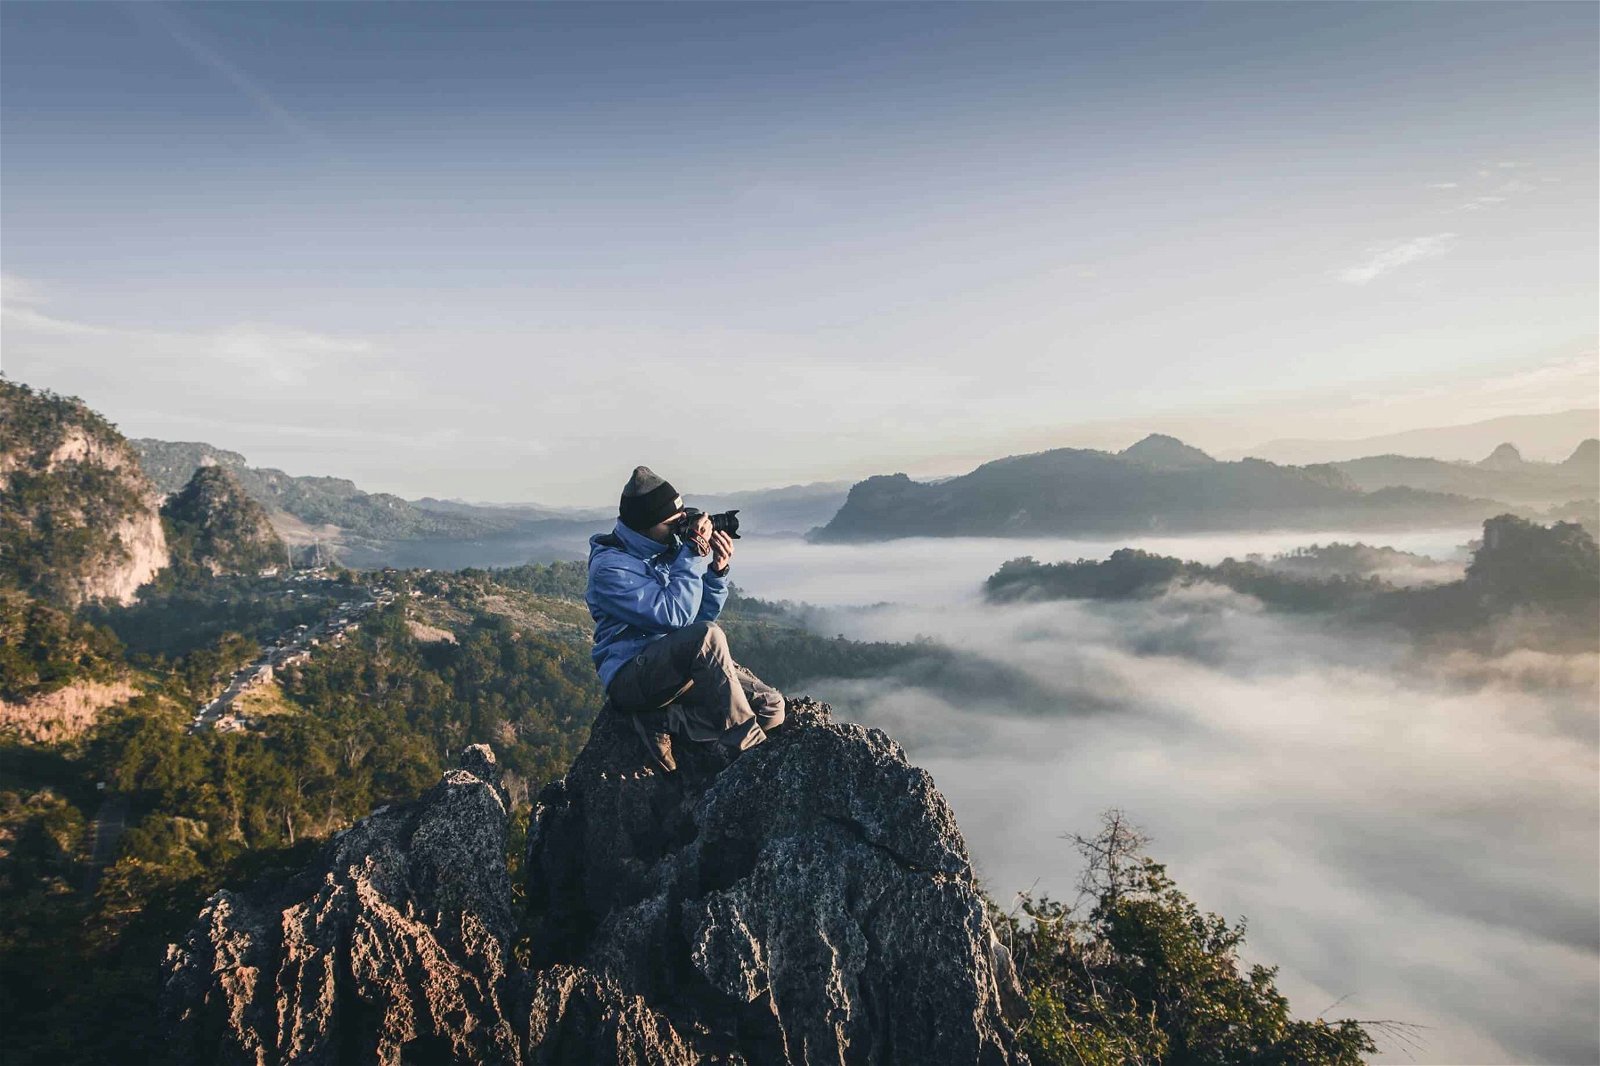 Wear appropriate clothing for the weather and the picture. It's a great travel photography tip and is demonstrated by the clothing worn by this photographer on a mountaintop.